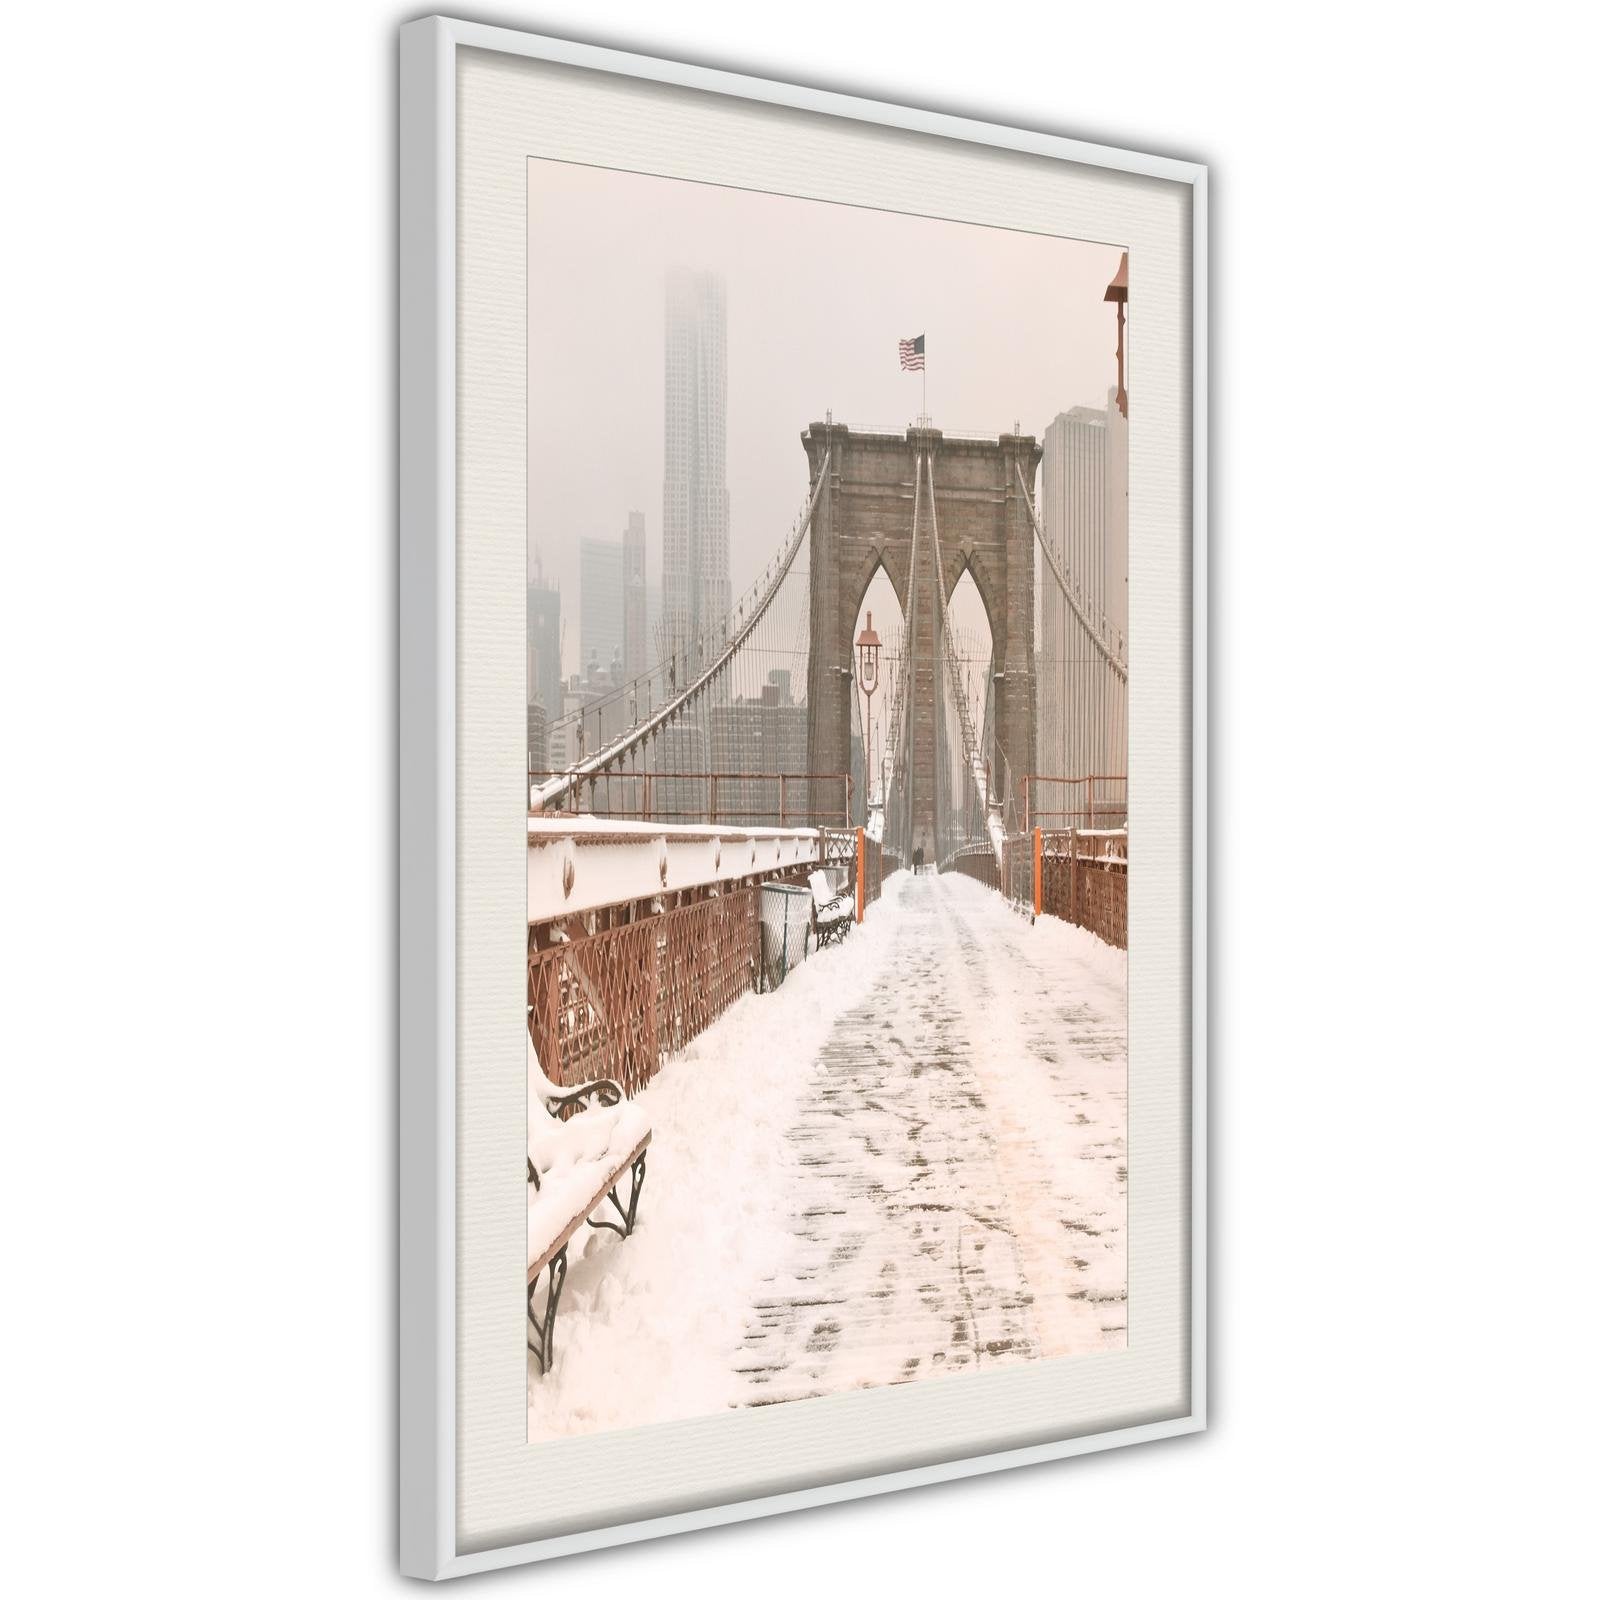 Inramad Poster / Tavla - Winter in New York-Poster Inramad-Artgeist-peaceofhome.se